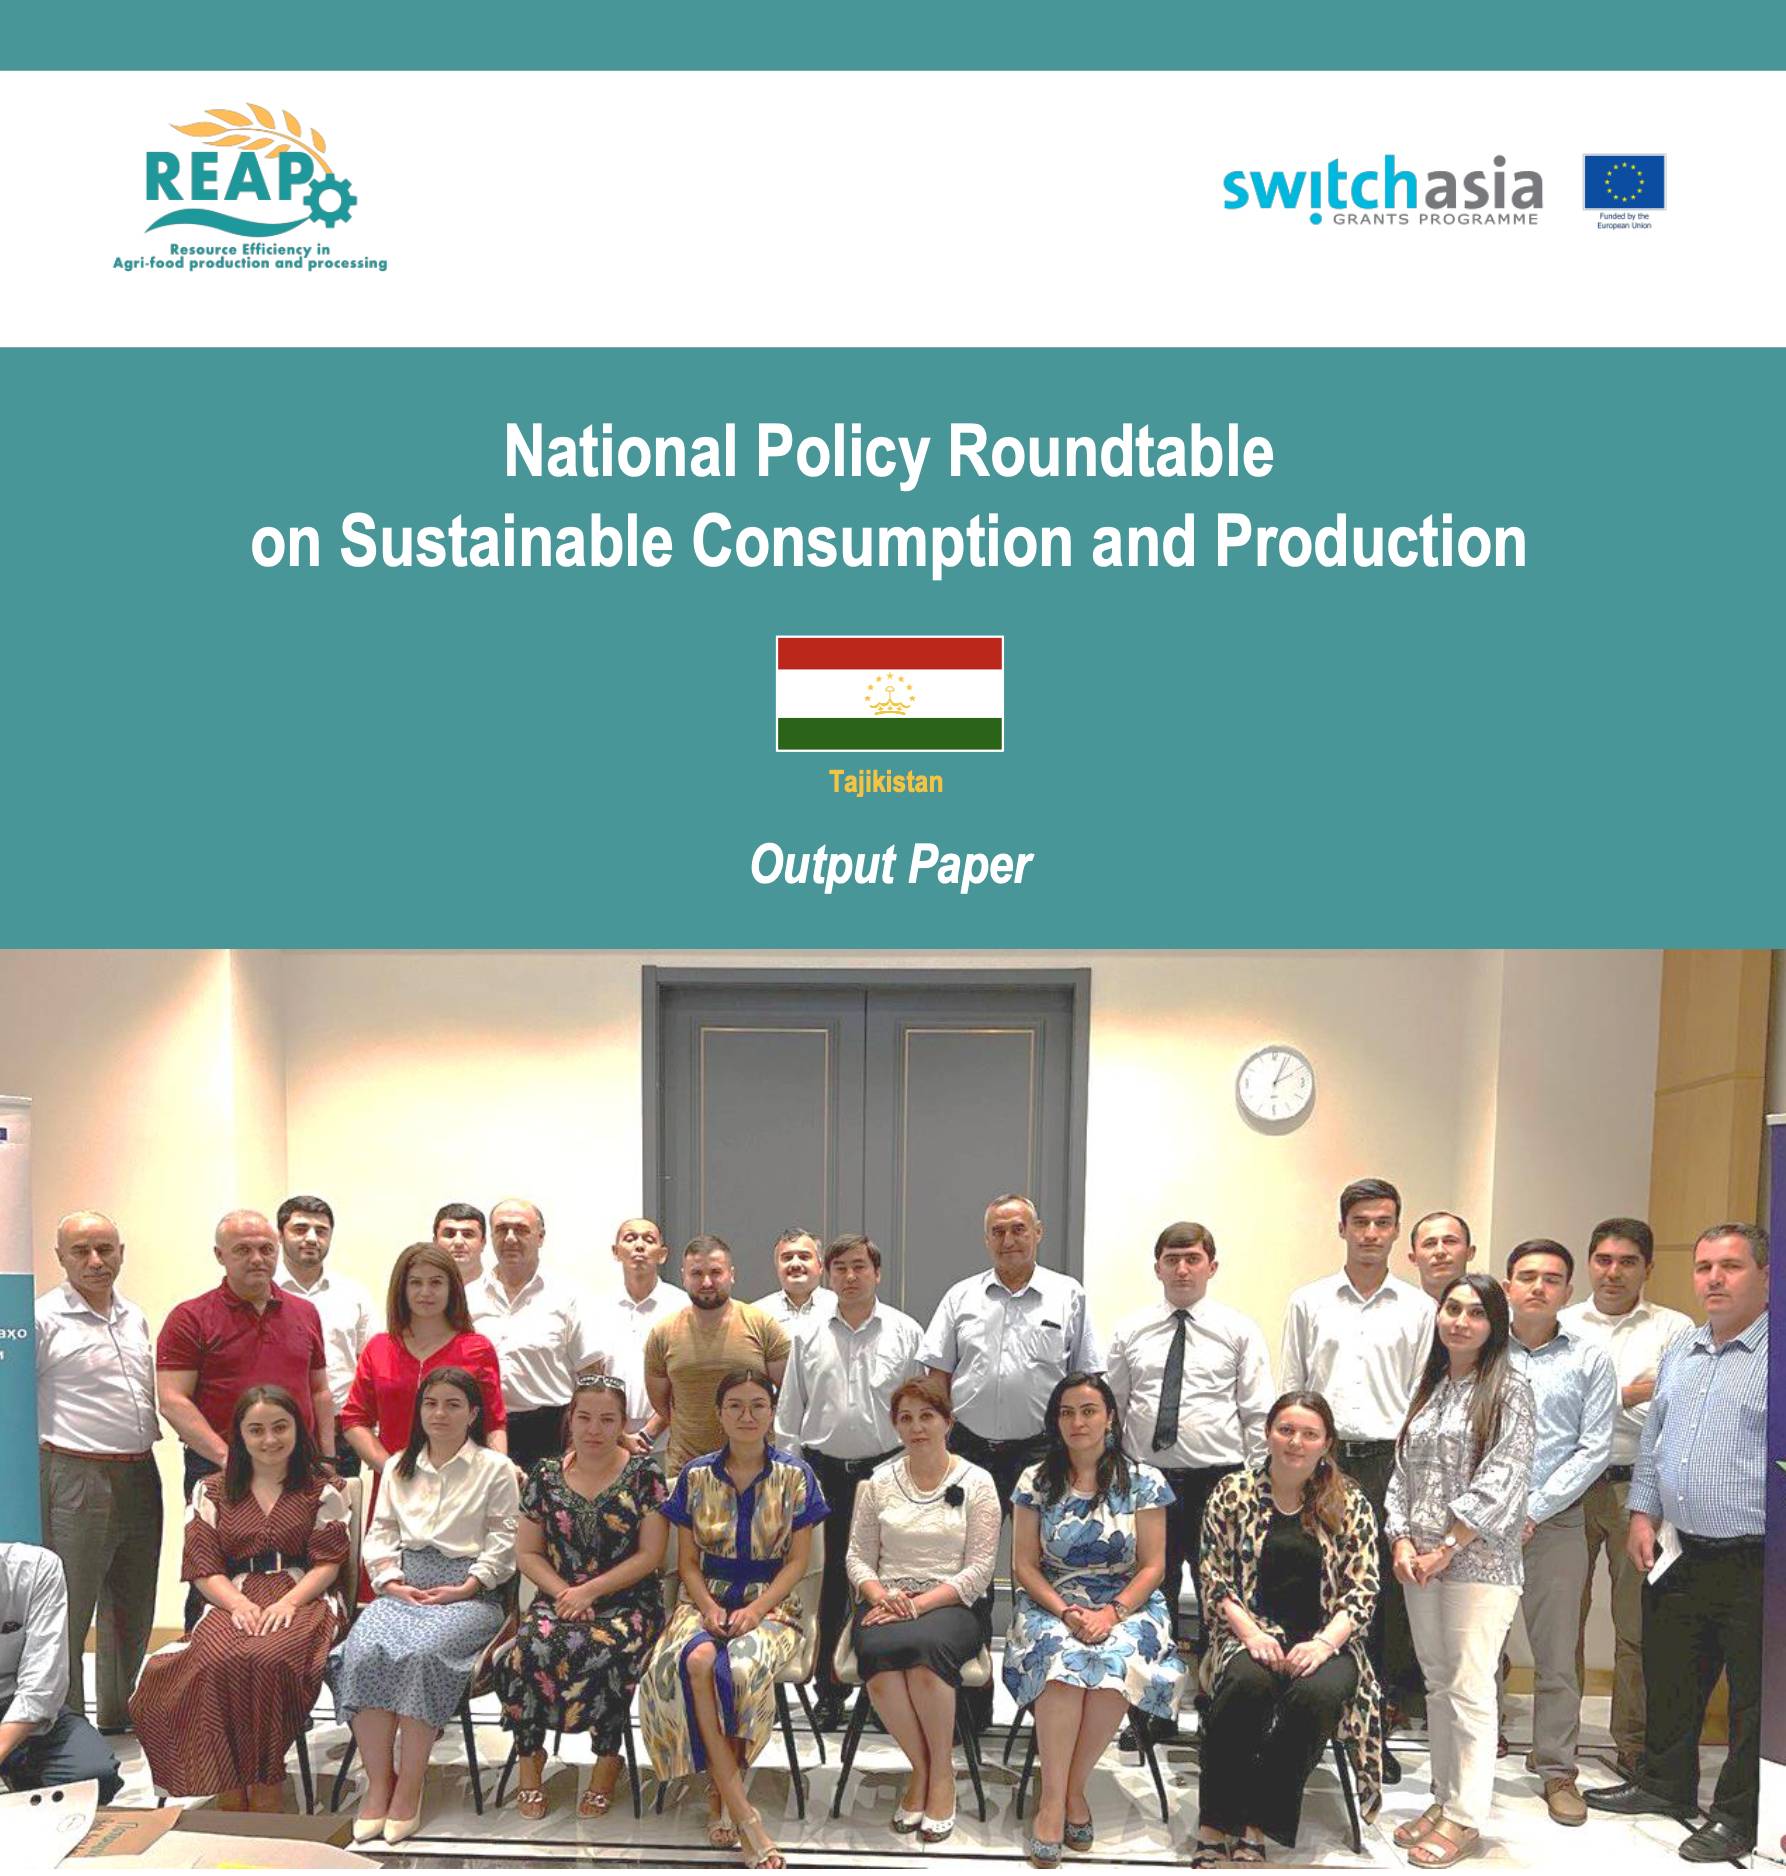 National Policy Roundtable on Sustainable Consumption and Production in Tajikistan